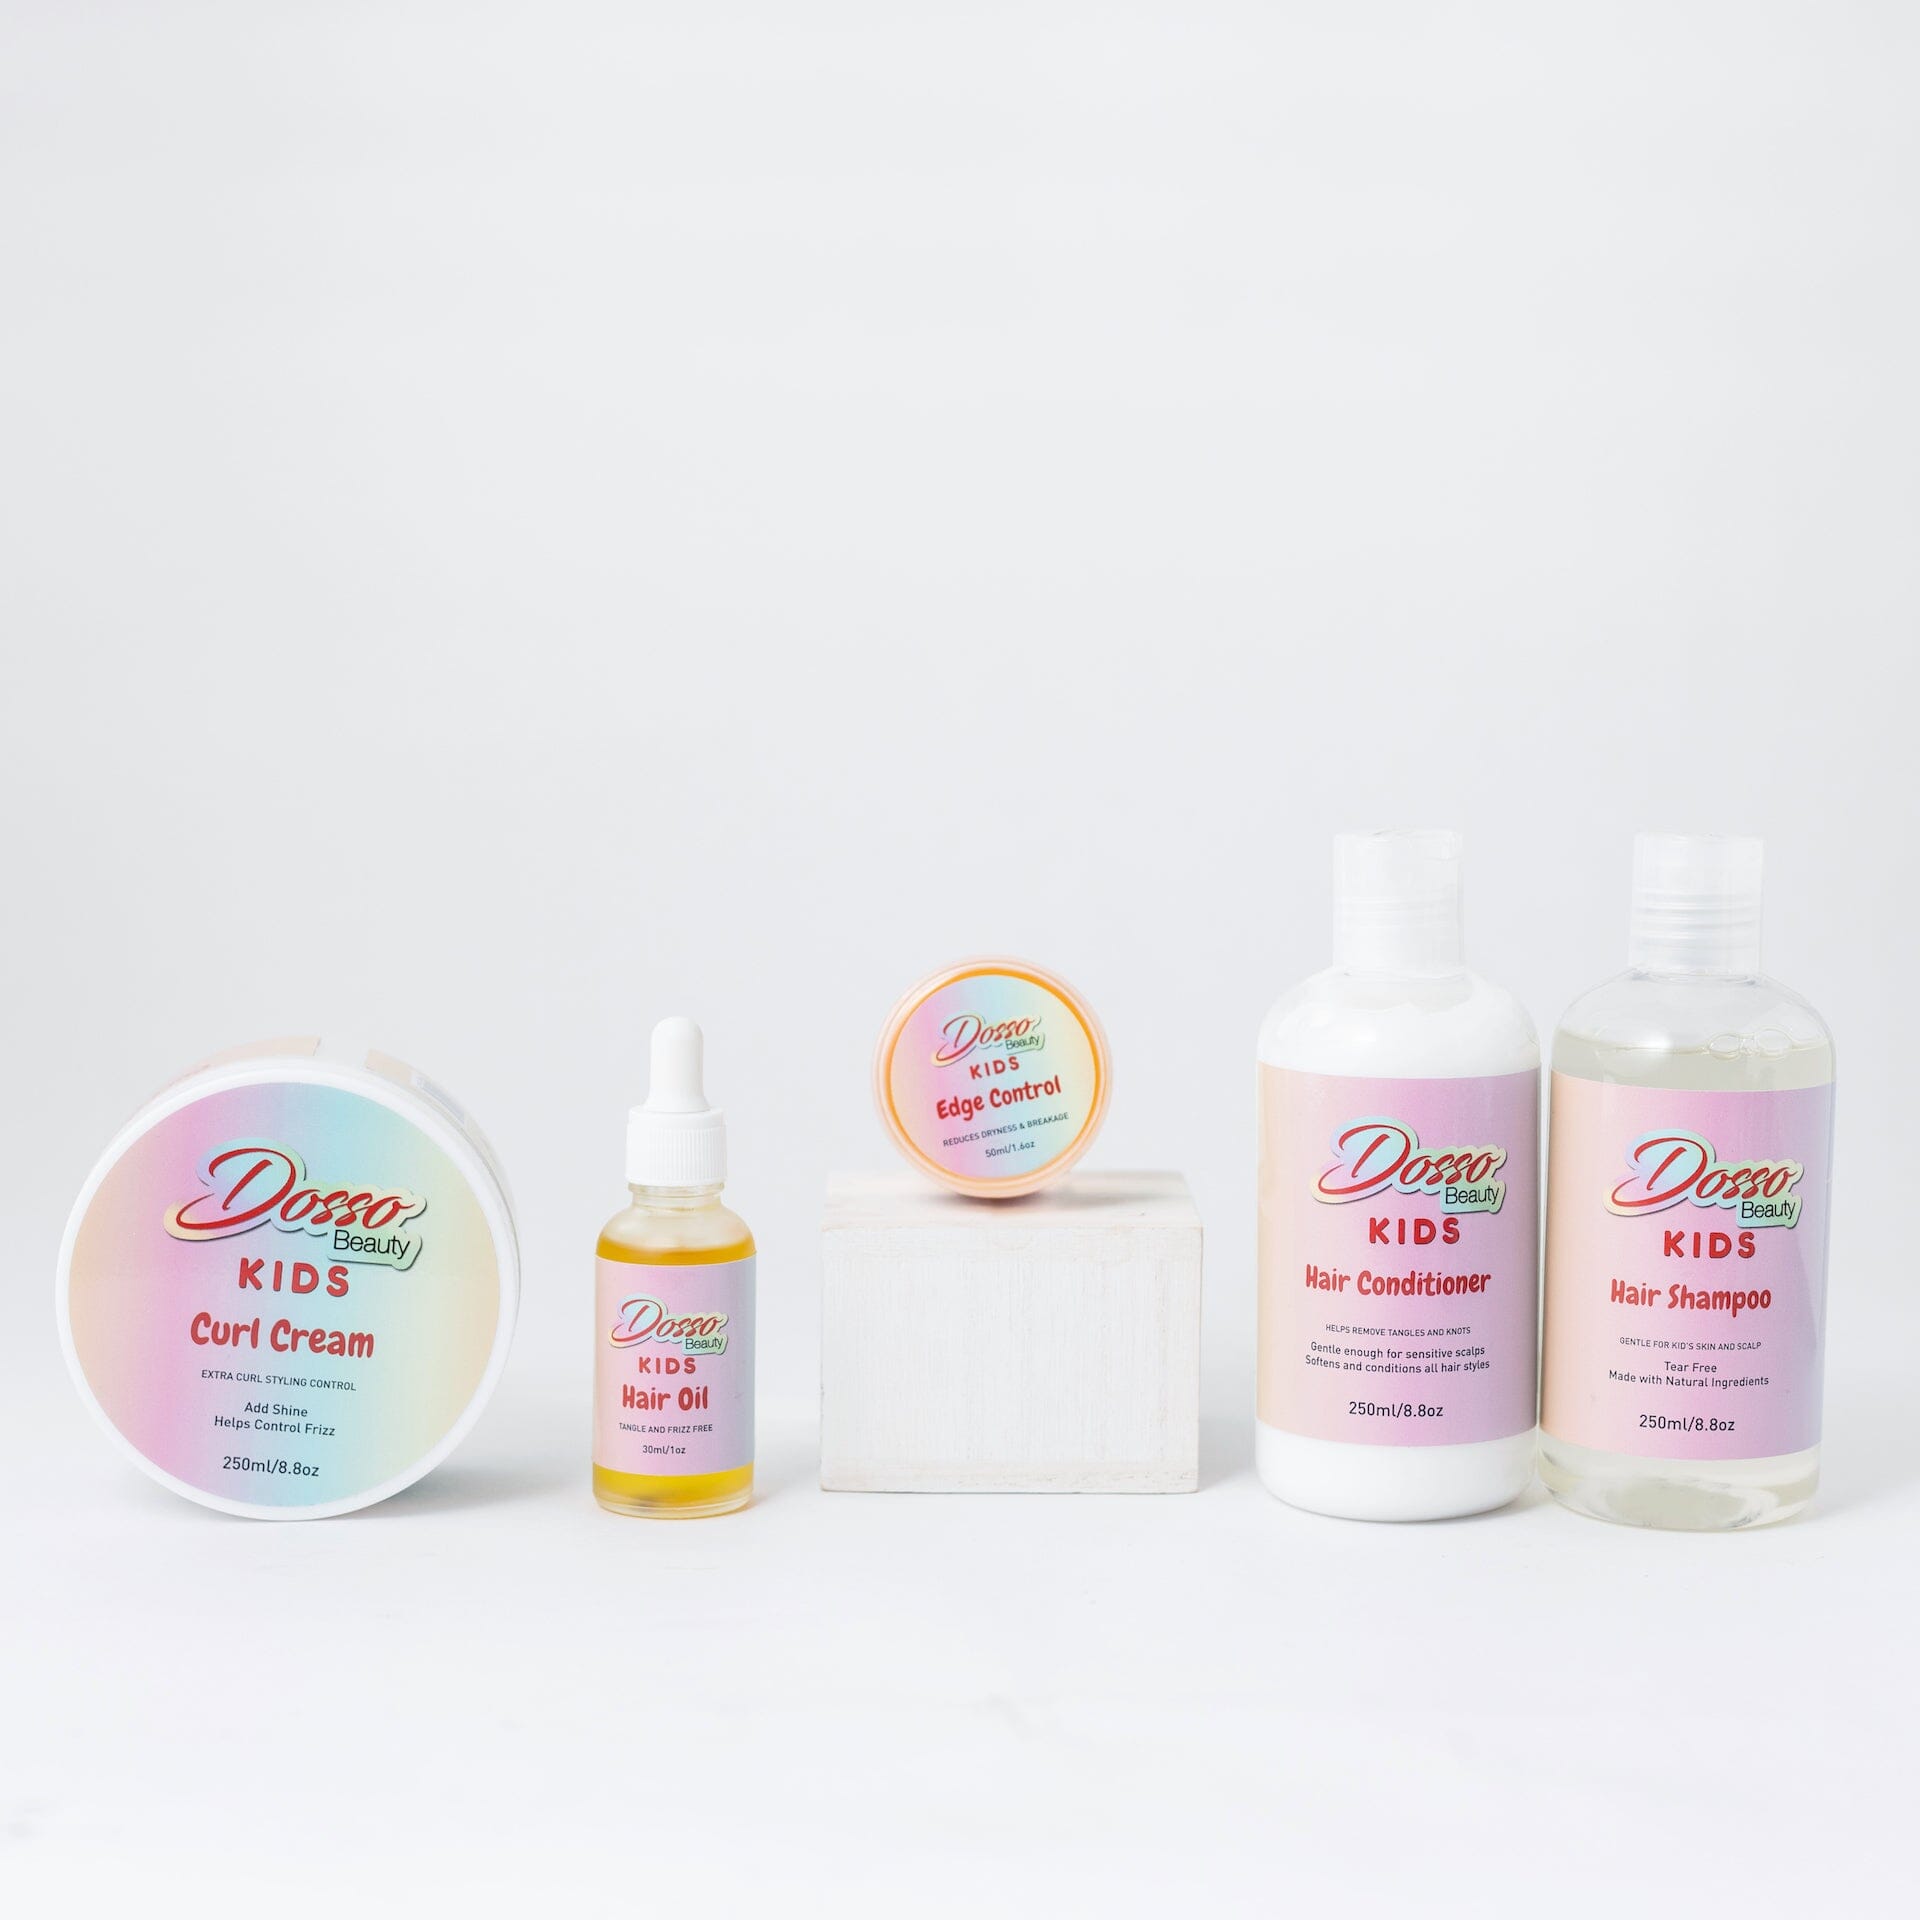 A group of kids hair care products, all branded with rainbow ombré labels, standing on a white field.